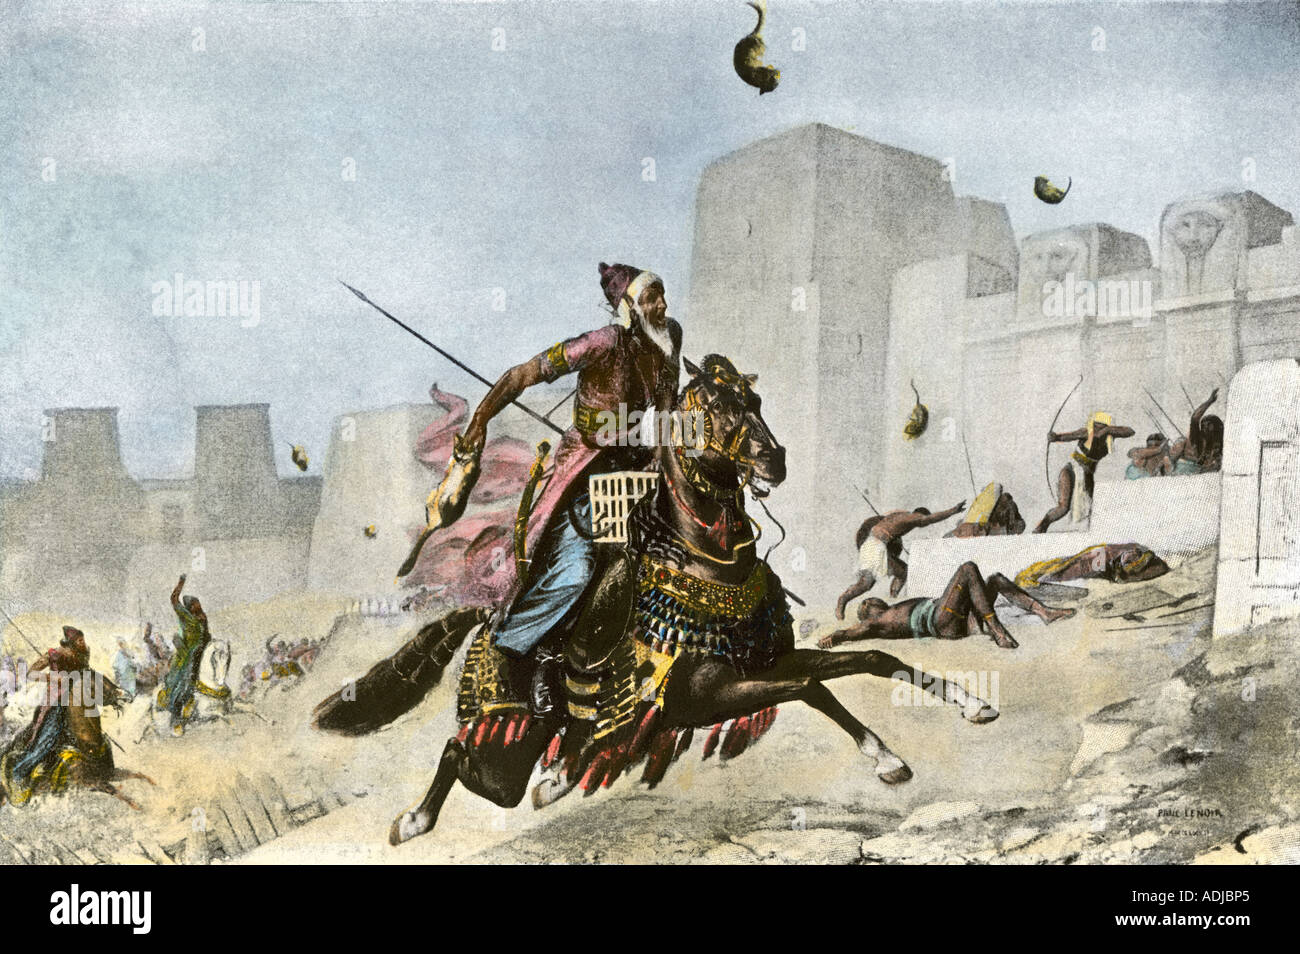 Persians hurling cats into Pelusium during Cambyses II conquest of Egypt 525 BC. Hand-colored halftone of an illustration Stock Photo